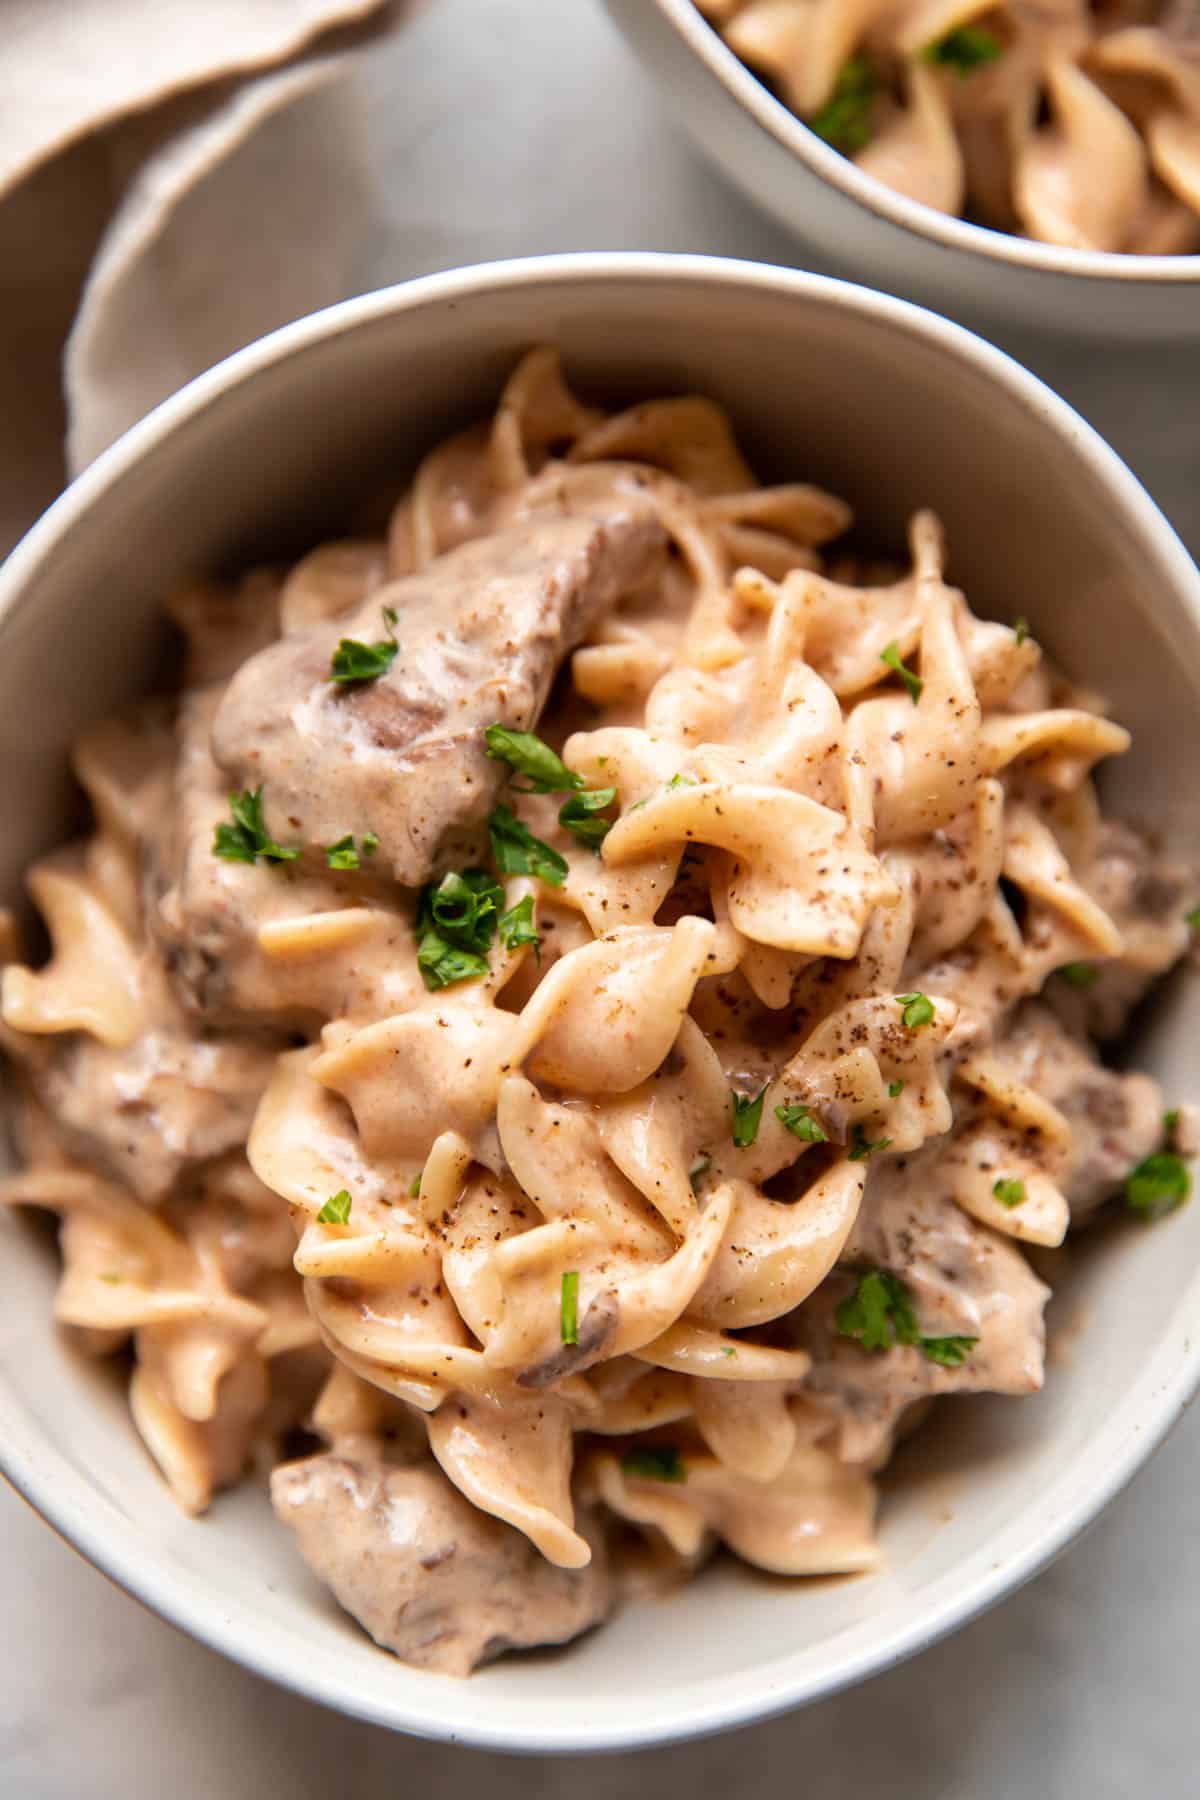 beef stroganoff with sour cream, egg noodle and chuck roast meat.